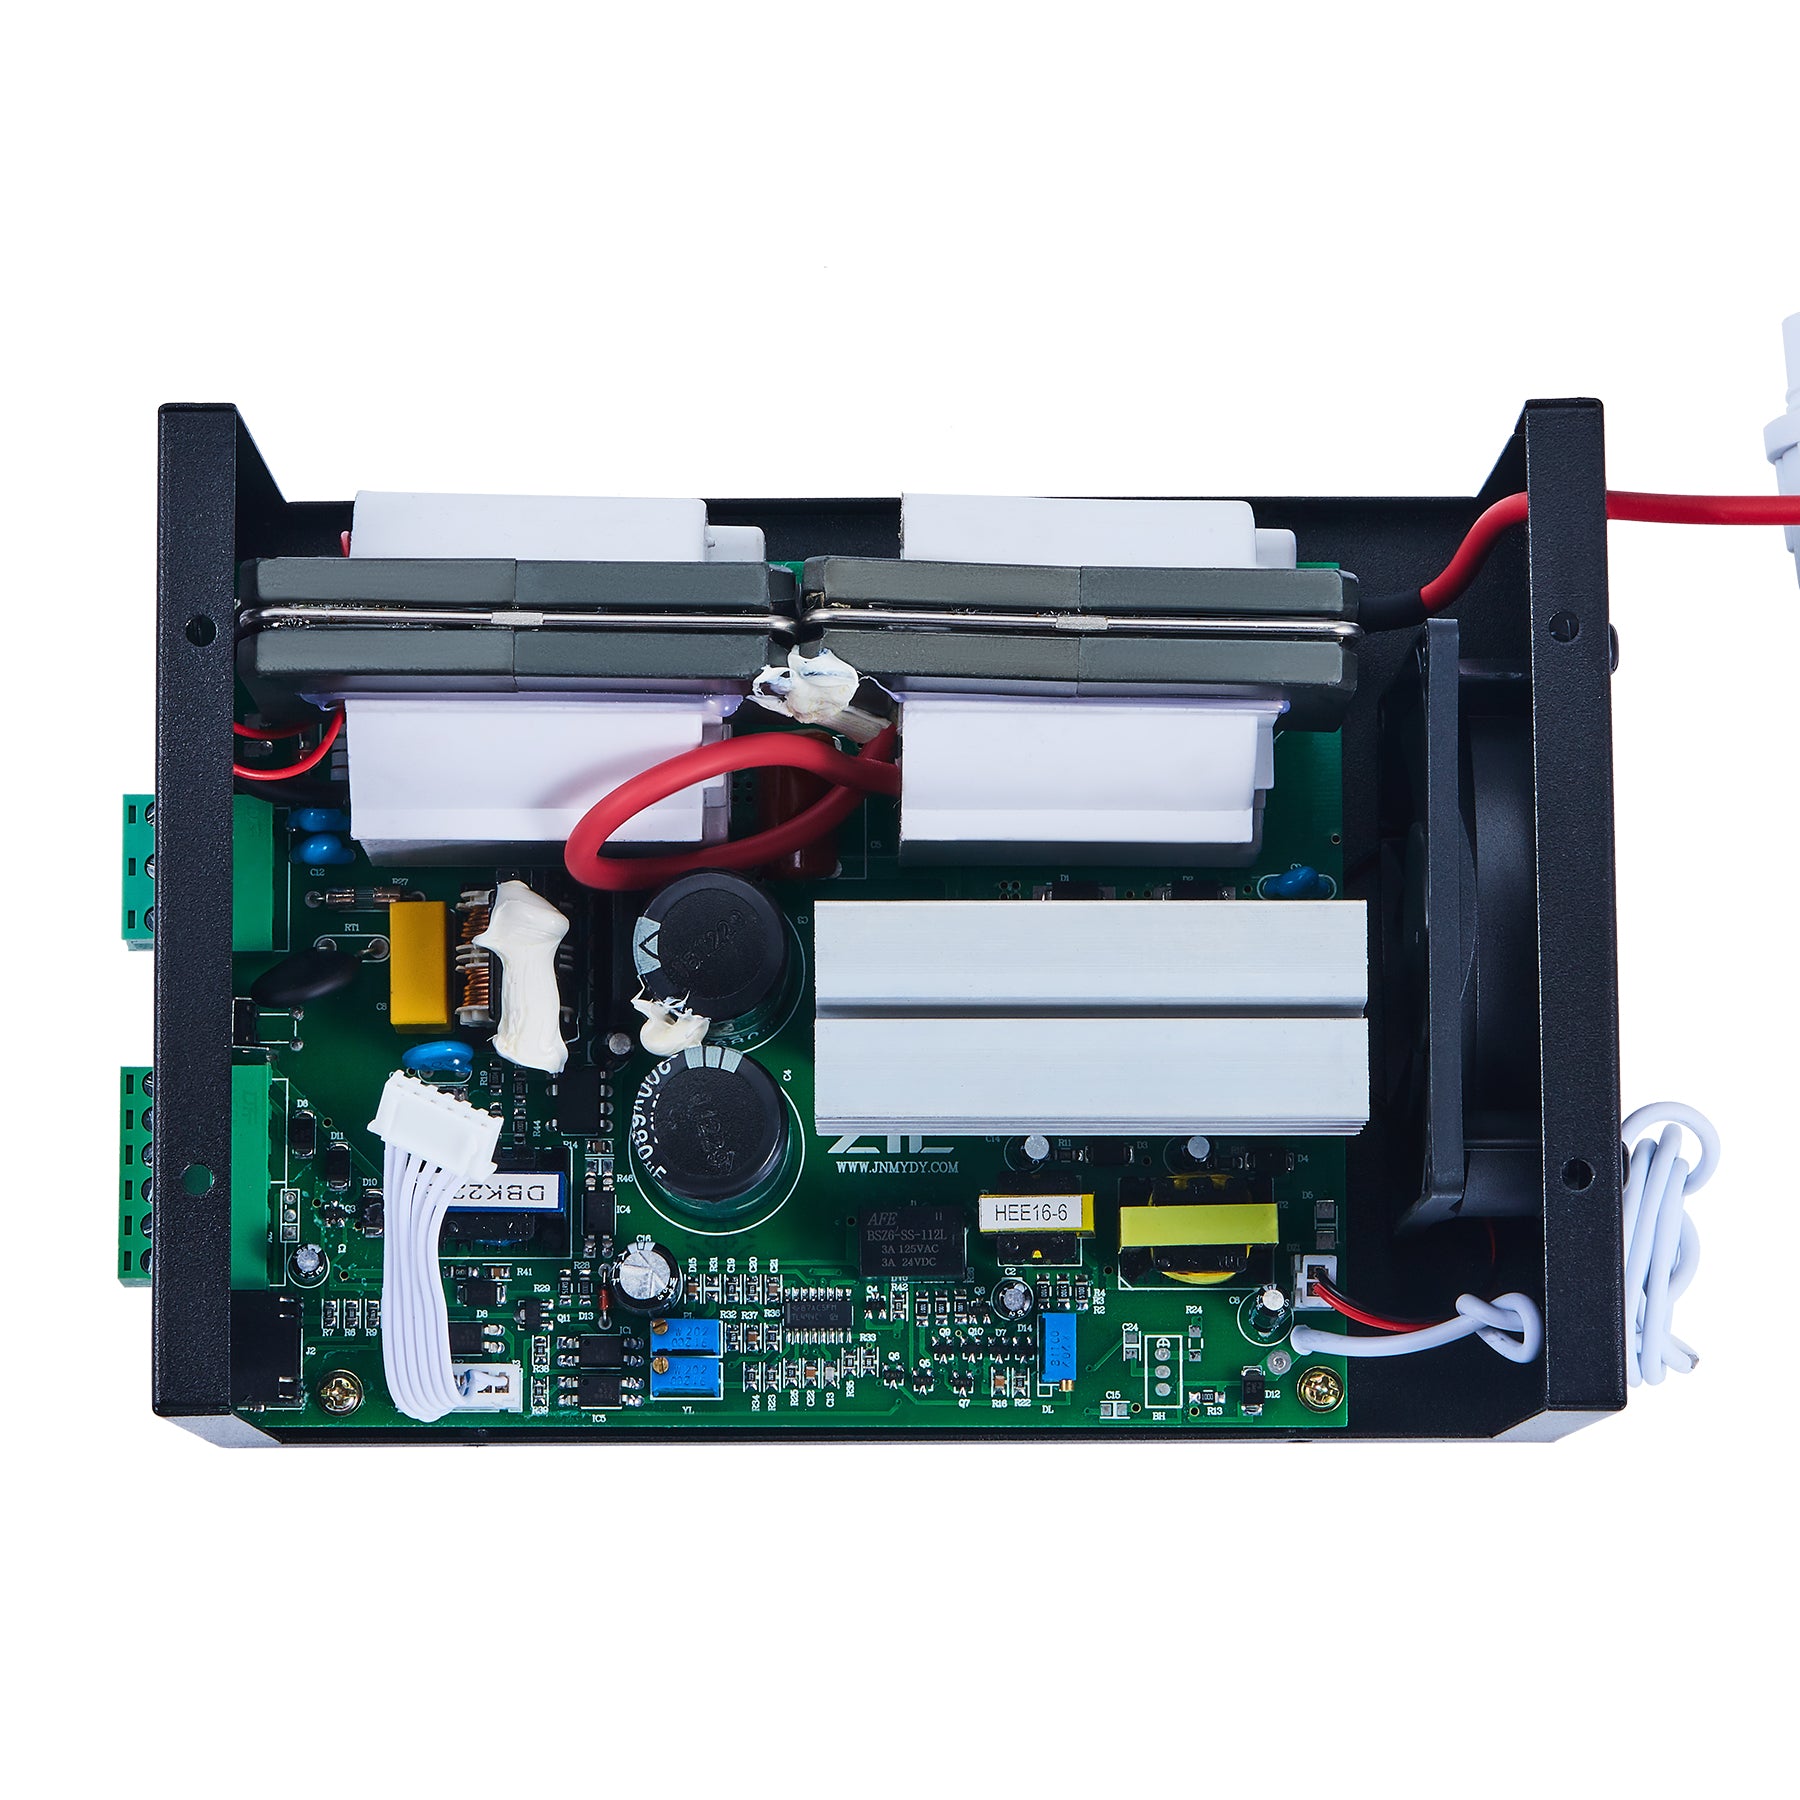 80W Laser Power Supply for CO2 Laser Engraver Cutting Machine | LN-80